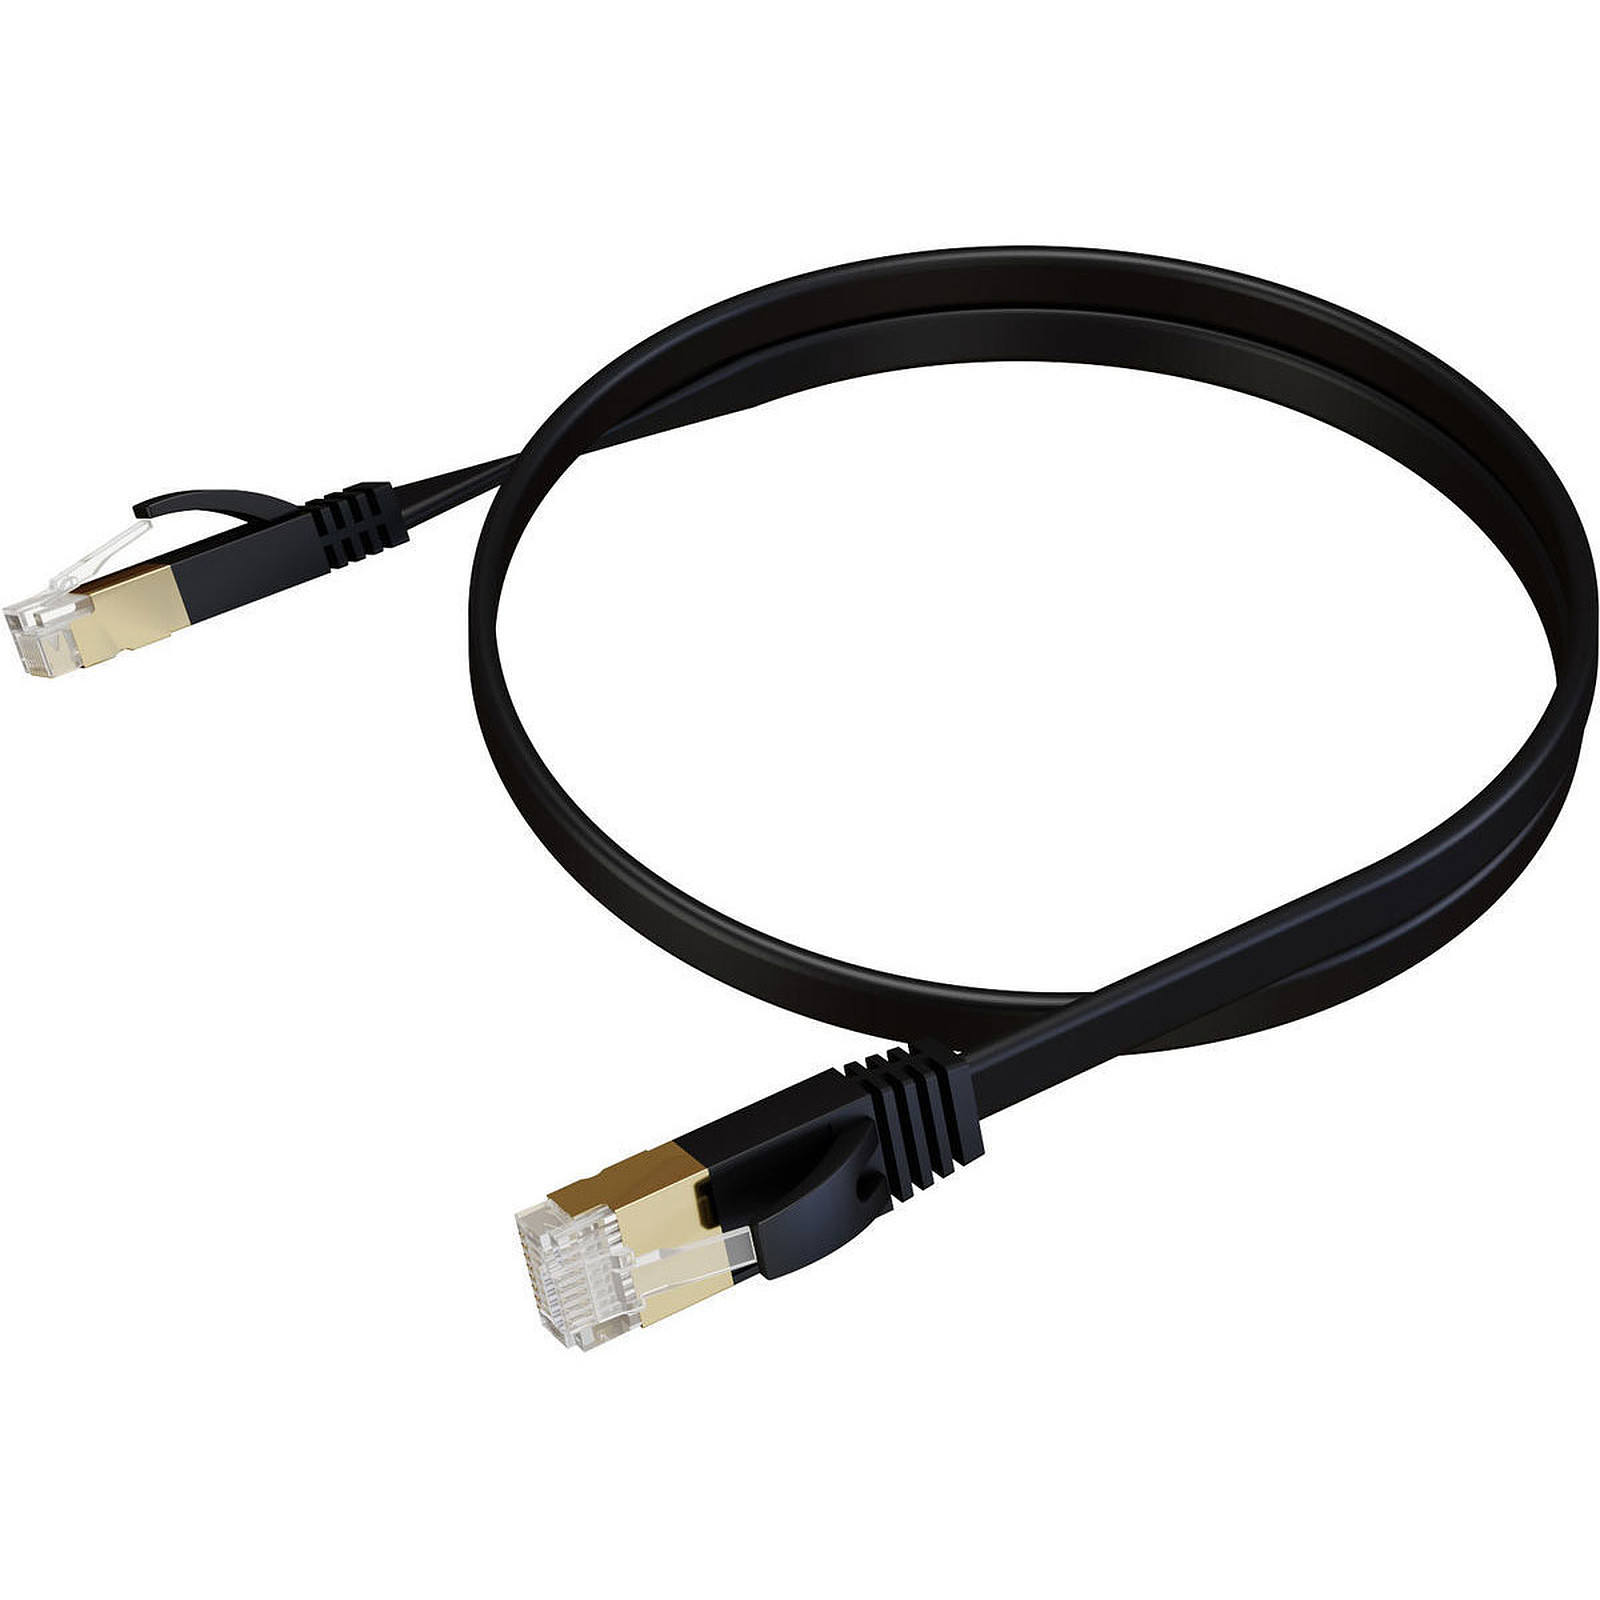 Real Cable E-NET 600-2 (5 m) - Cable RJ45 Real Cable